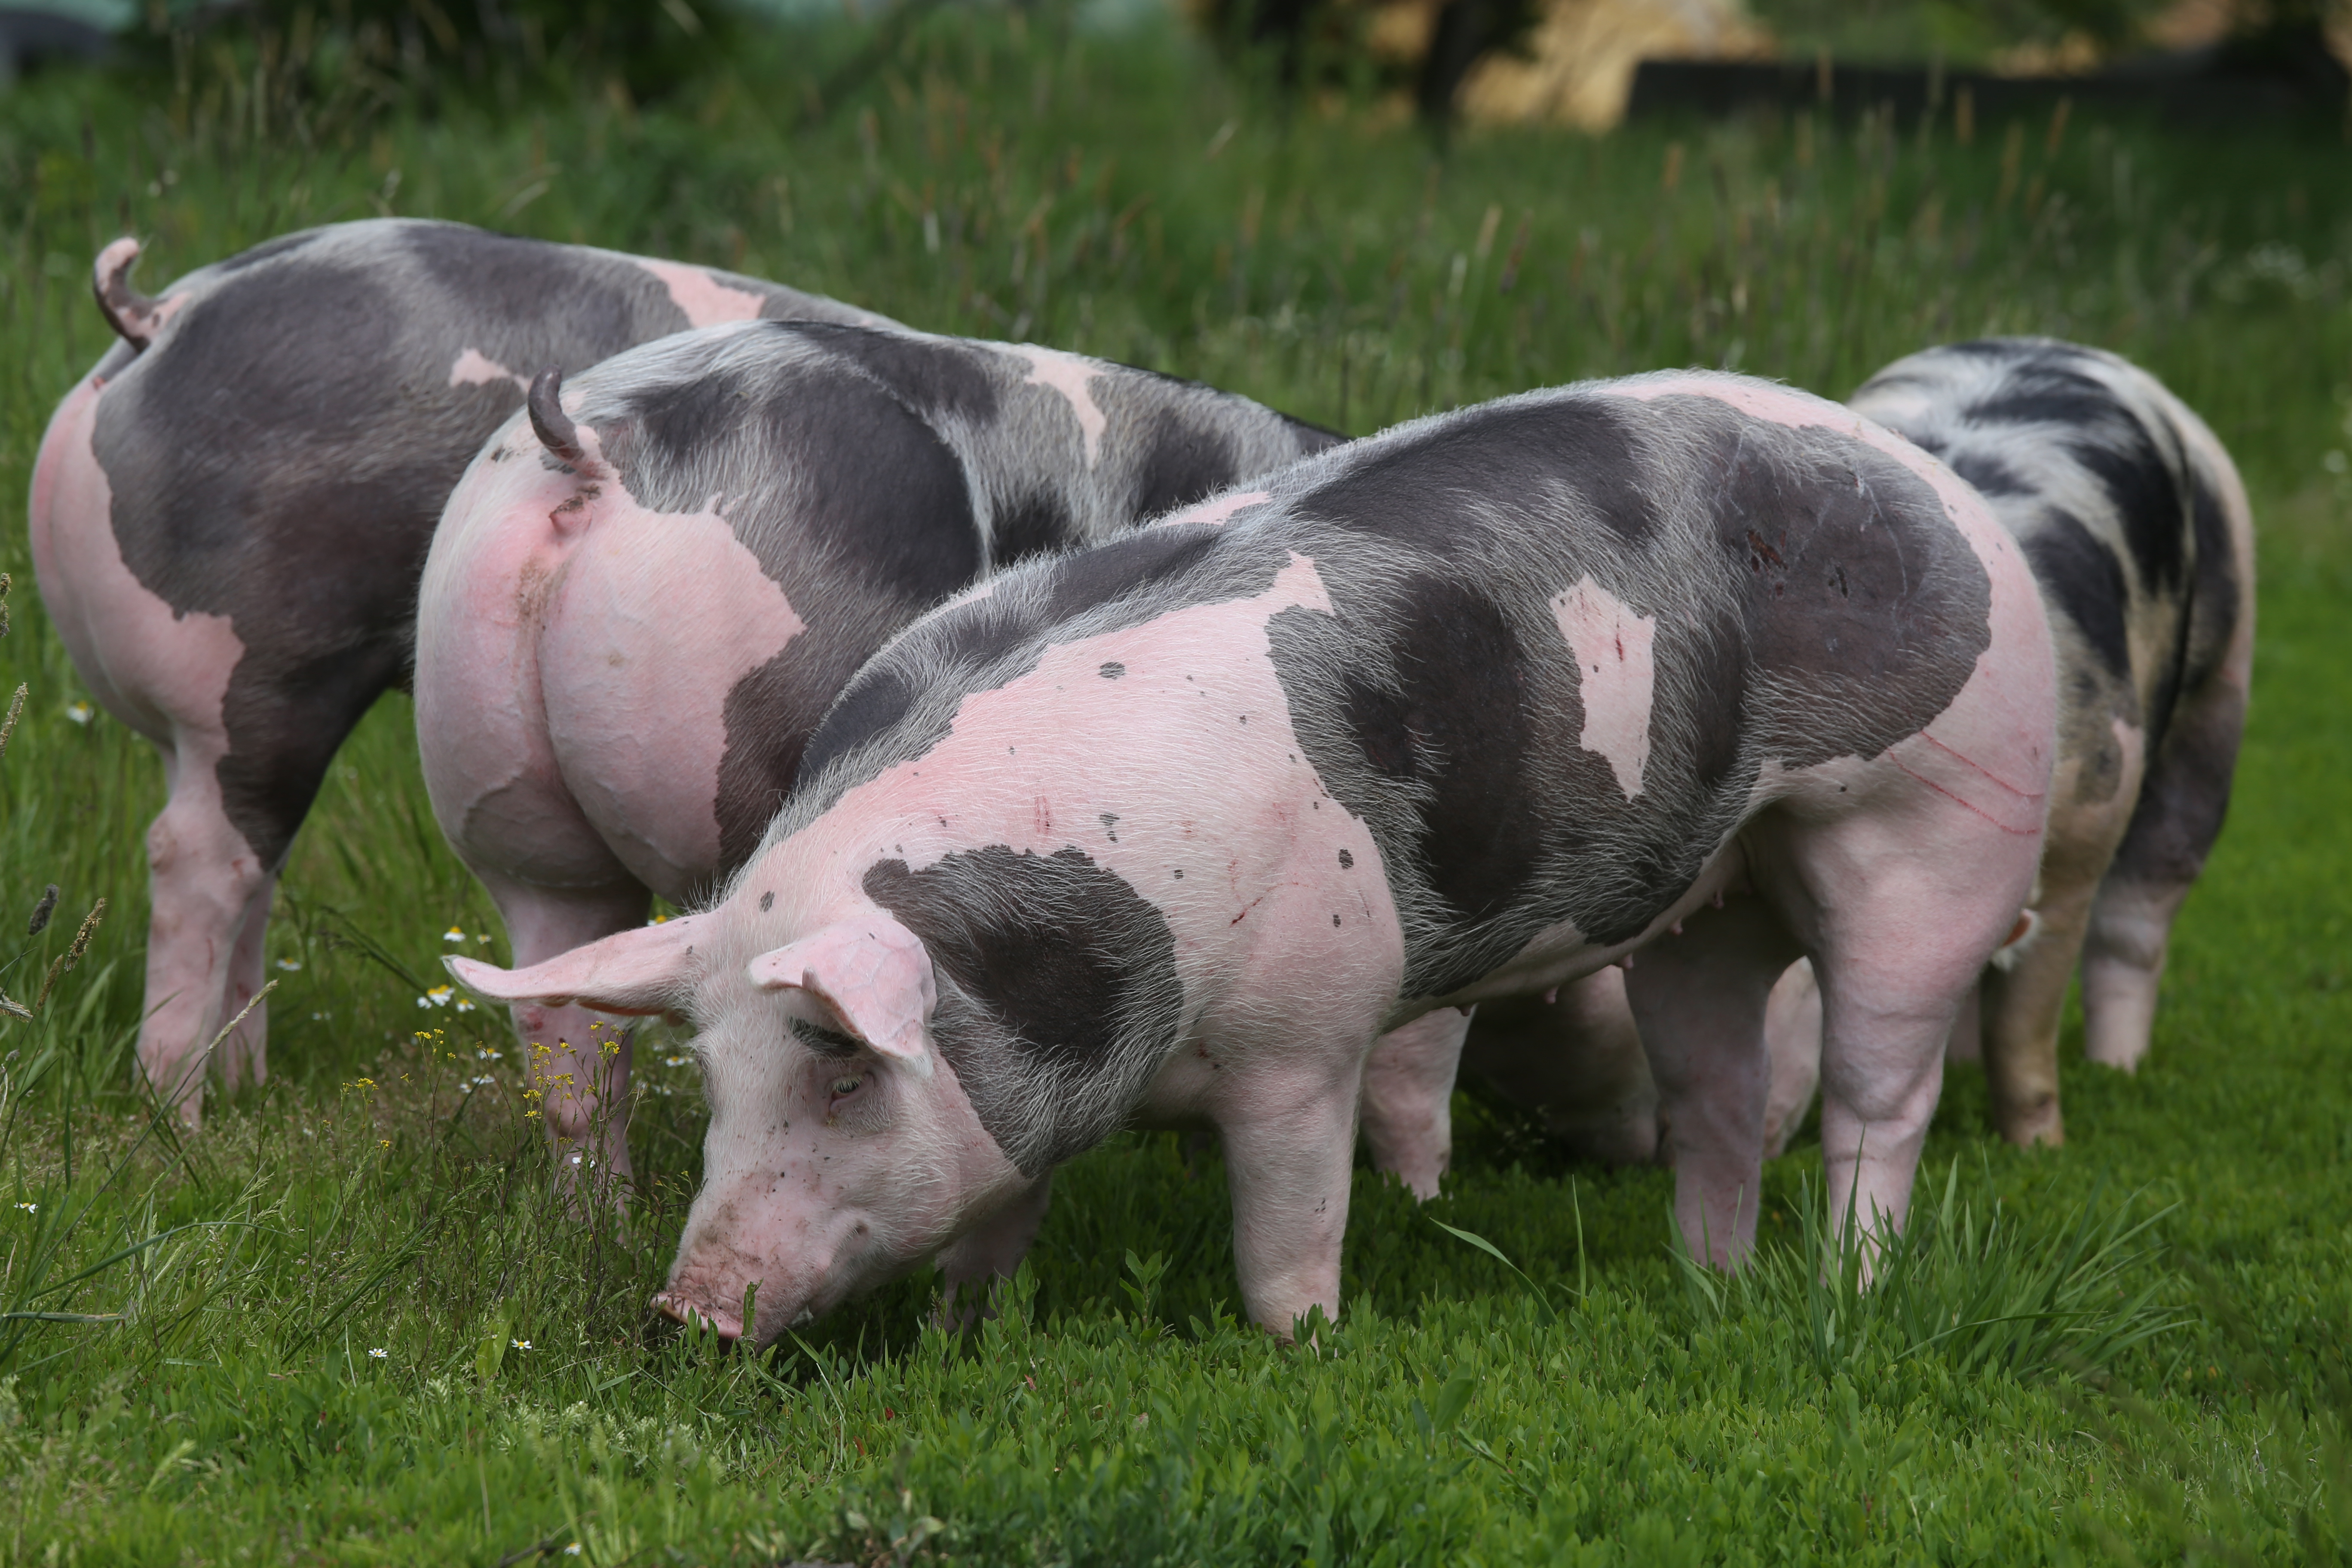 The Pietrain breed has been associated with lower incidences of boar taint in meat produced from this breed